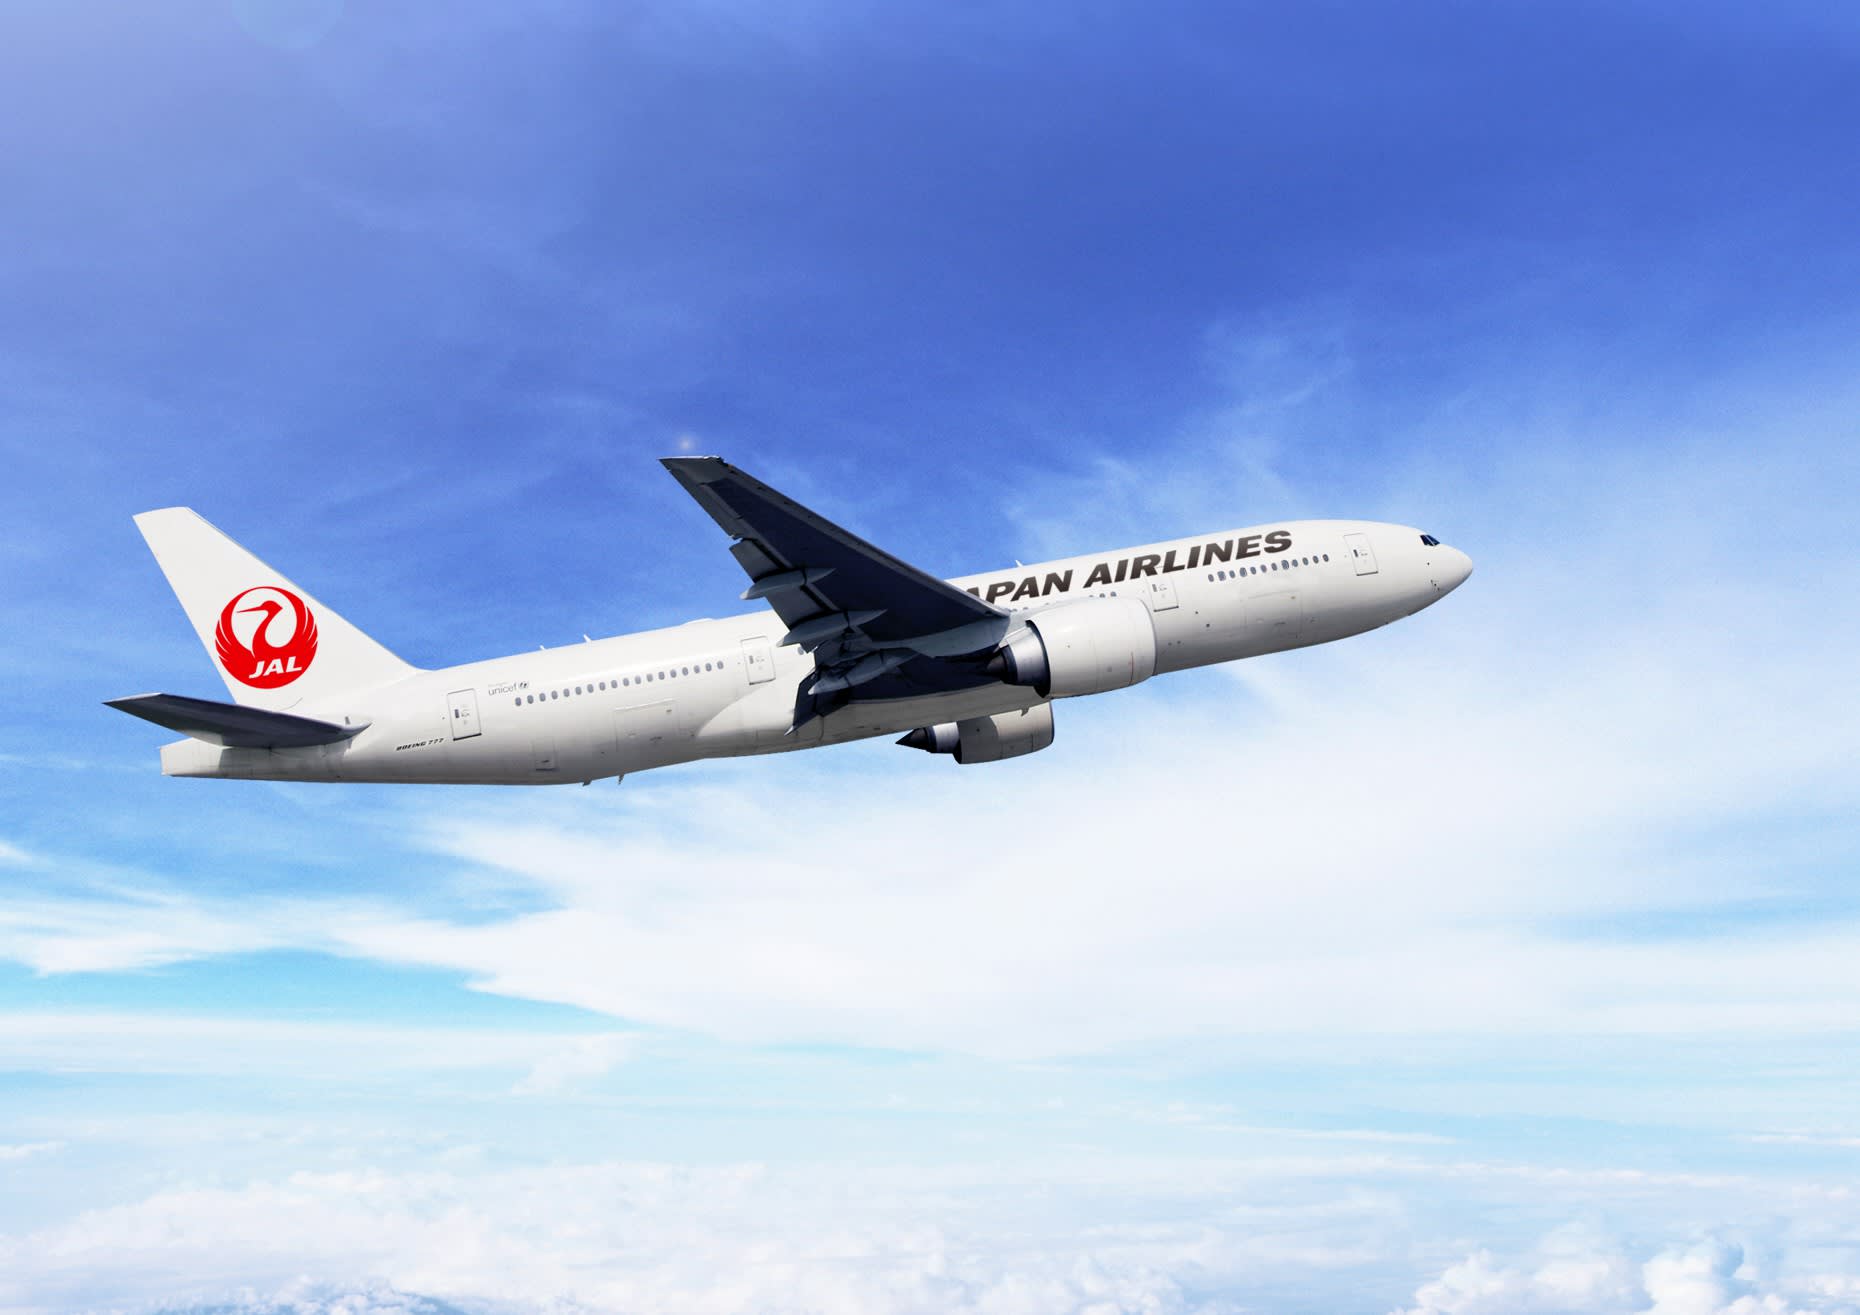 Old Jal Logo - JAL aims to give old clothes new life as jet fuel - Nikkei Asian Review